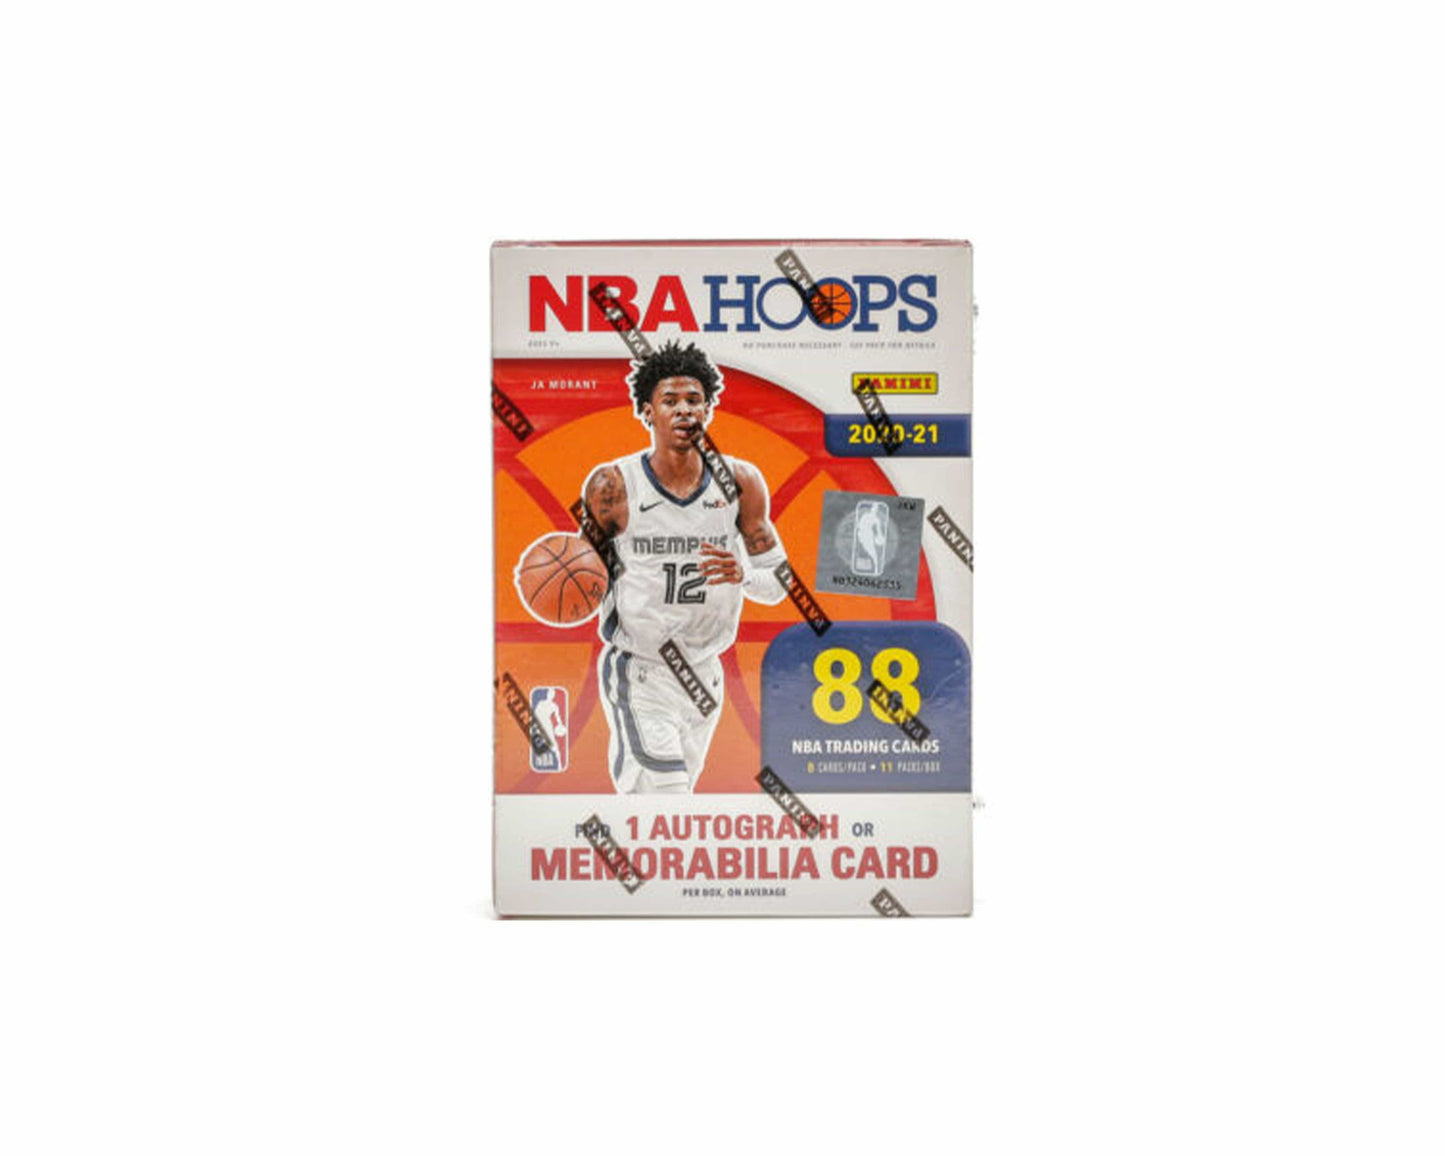 2020-21 Panini NBA Hoops Basketball Blaster Box - Only at www.BallersClubKickz.com - The 2020-21 Panini NBA Hoops Basketball Blaster Box is part of the first set to feature the pro cards of the 2020-21 NBA Rookie class. The hobby box for the set is scheduled to release on February 3, 2021, with retail beginning to roll out in the weeks following. Each blaster box will contain 8 cards per pack and 11 packs per box.